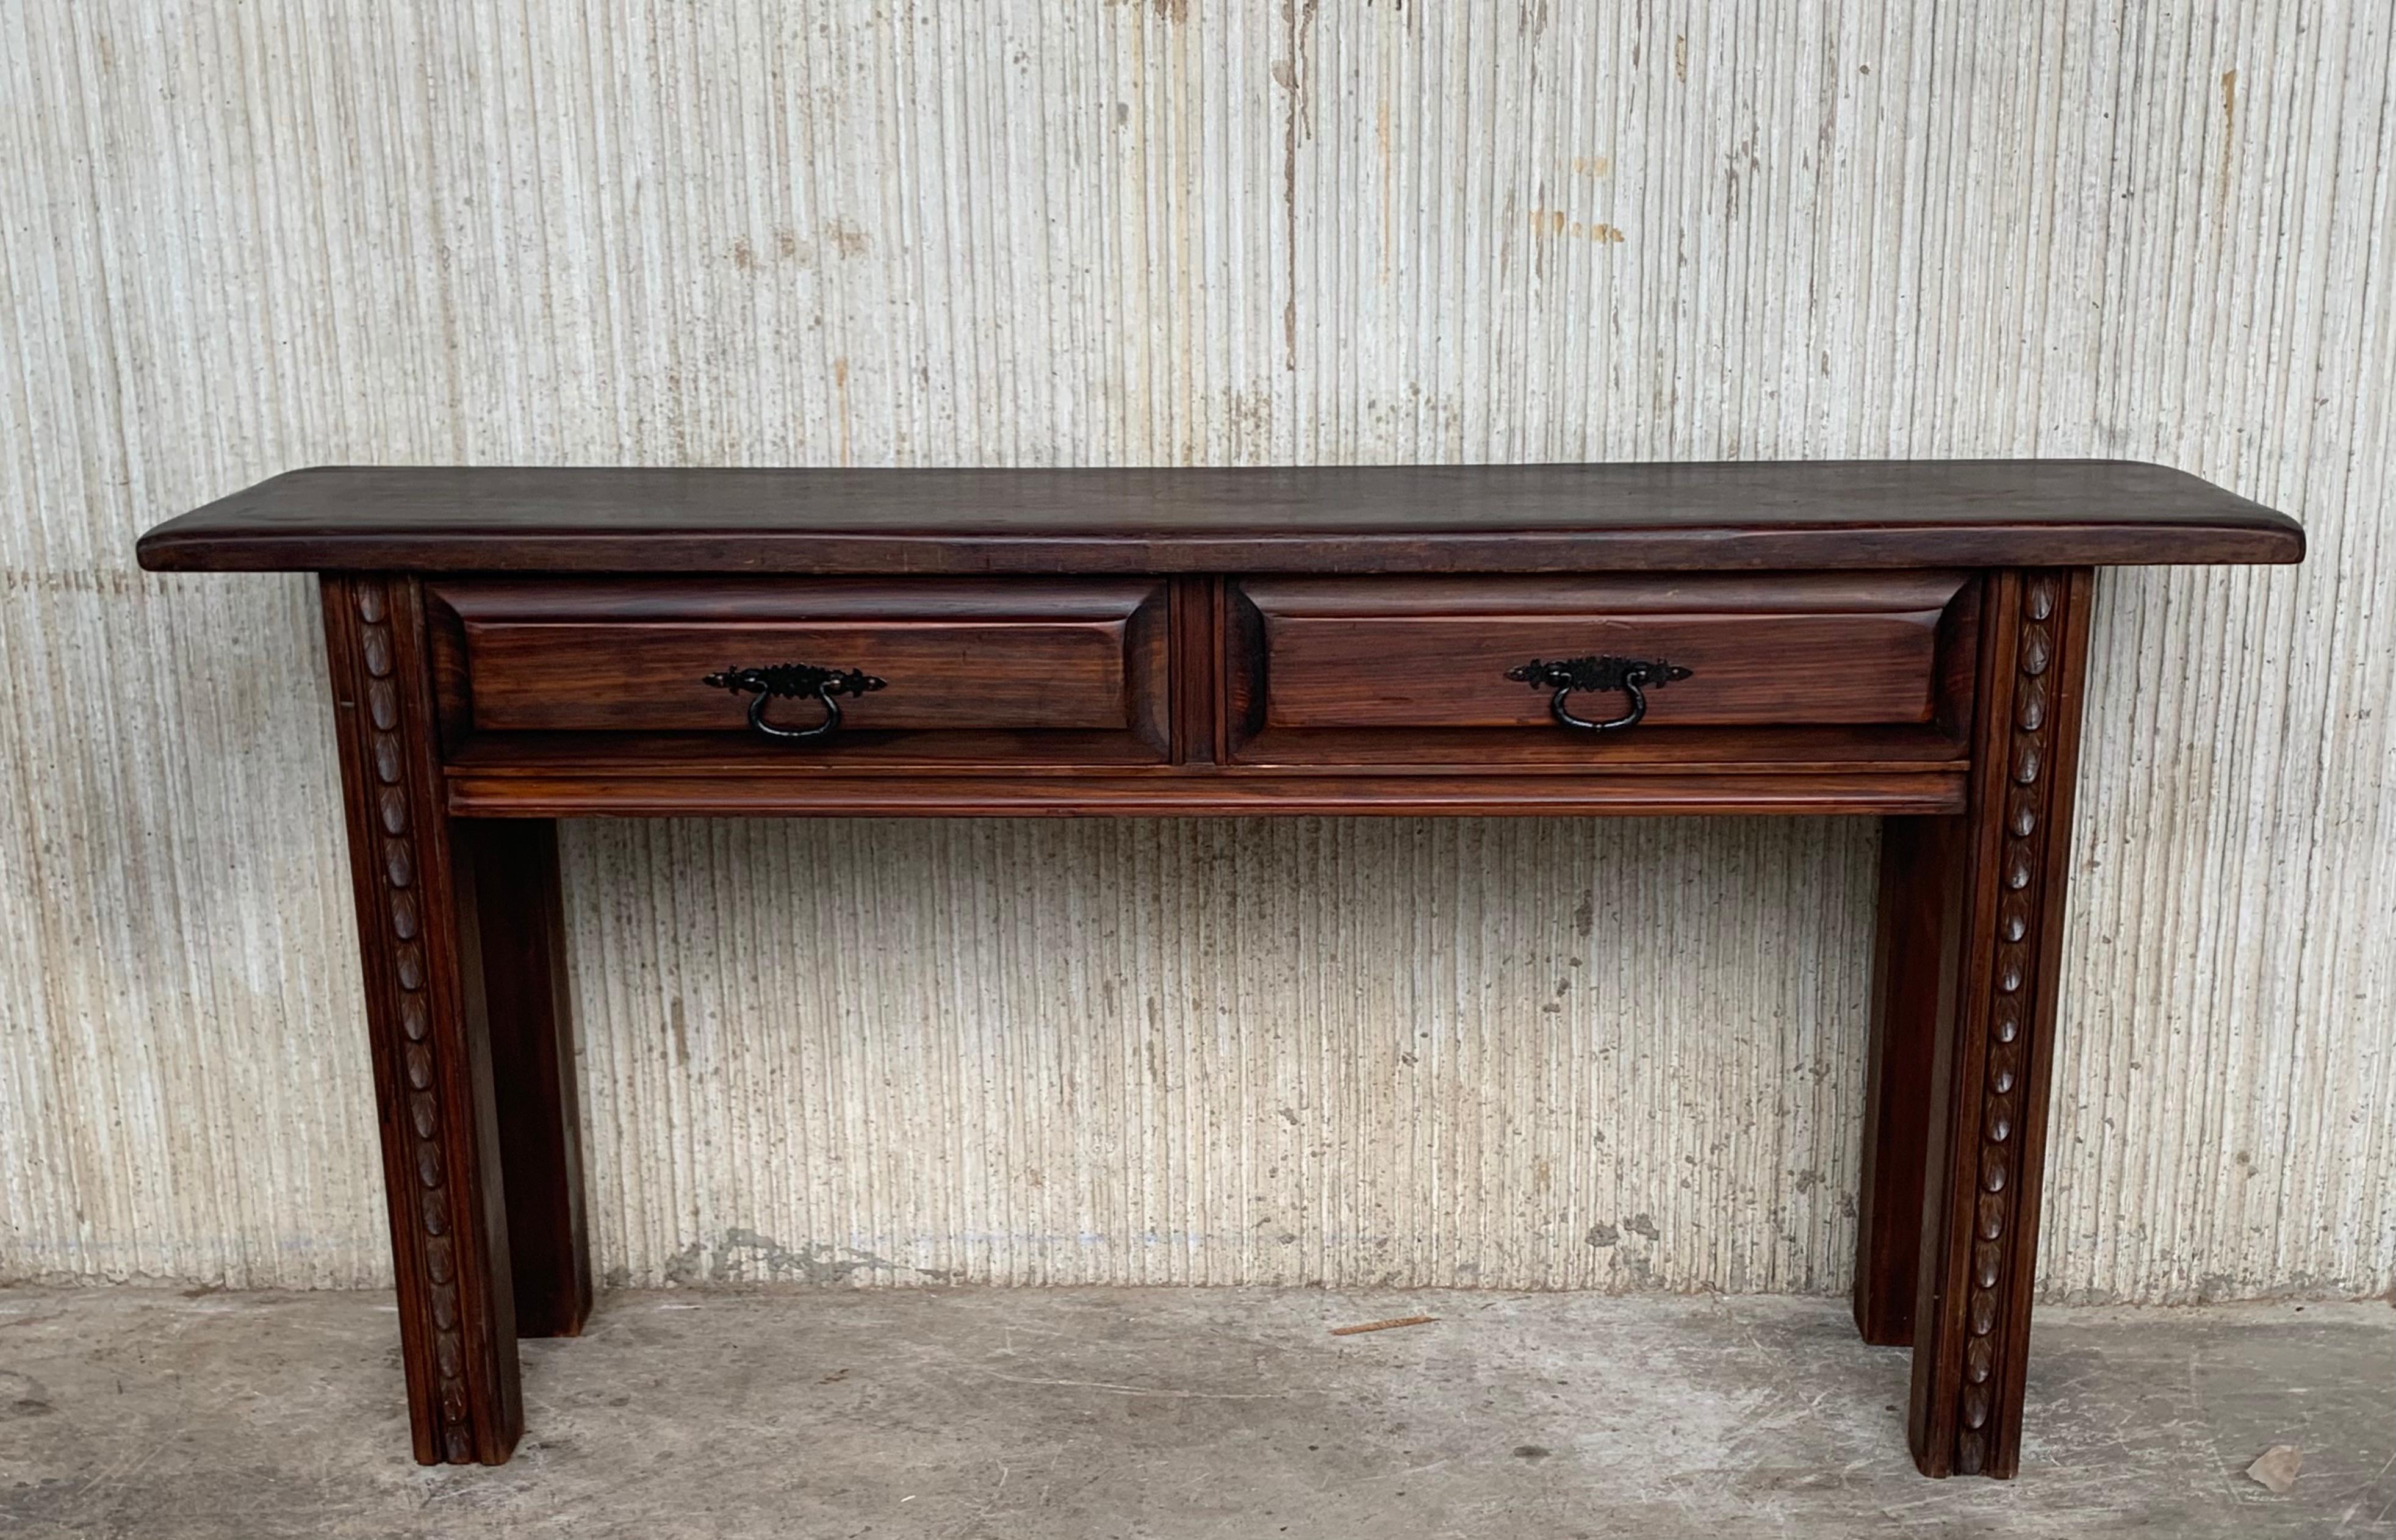 An 19th century Spanish Baroque console, or writing table made of solid walnut with carved shaped legs. Two dovetailed drawers with original iron drawer pulls. The top is made from a single plank of walnut with beautiful grain. Nice character to the